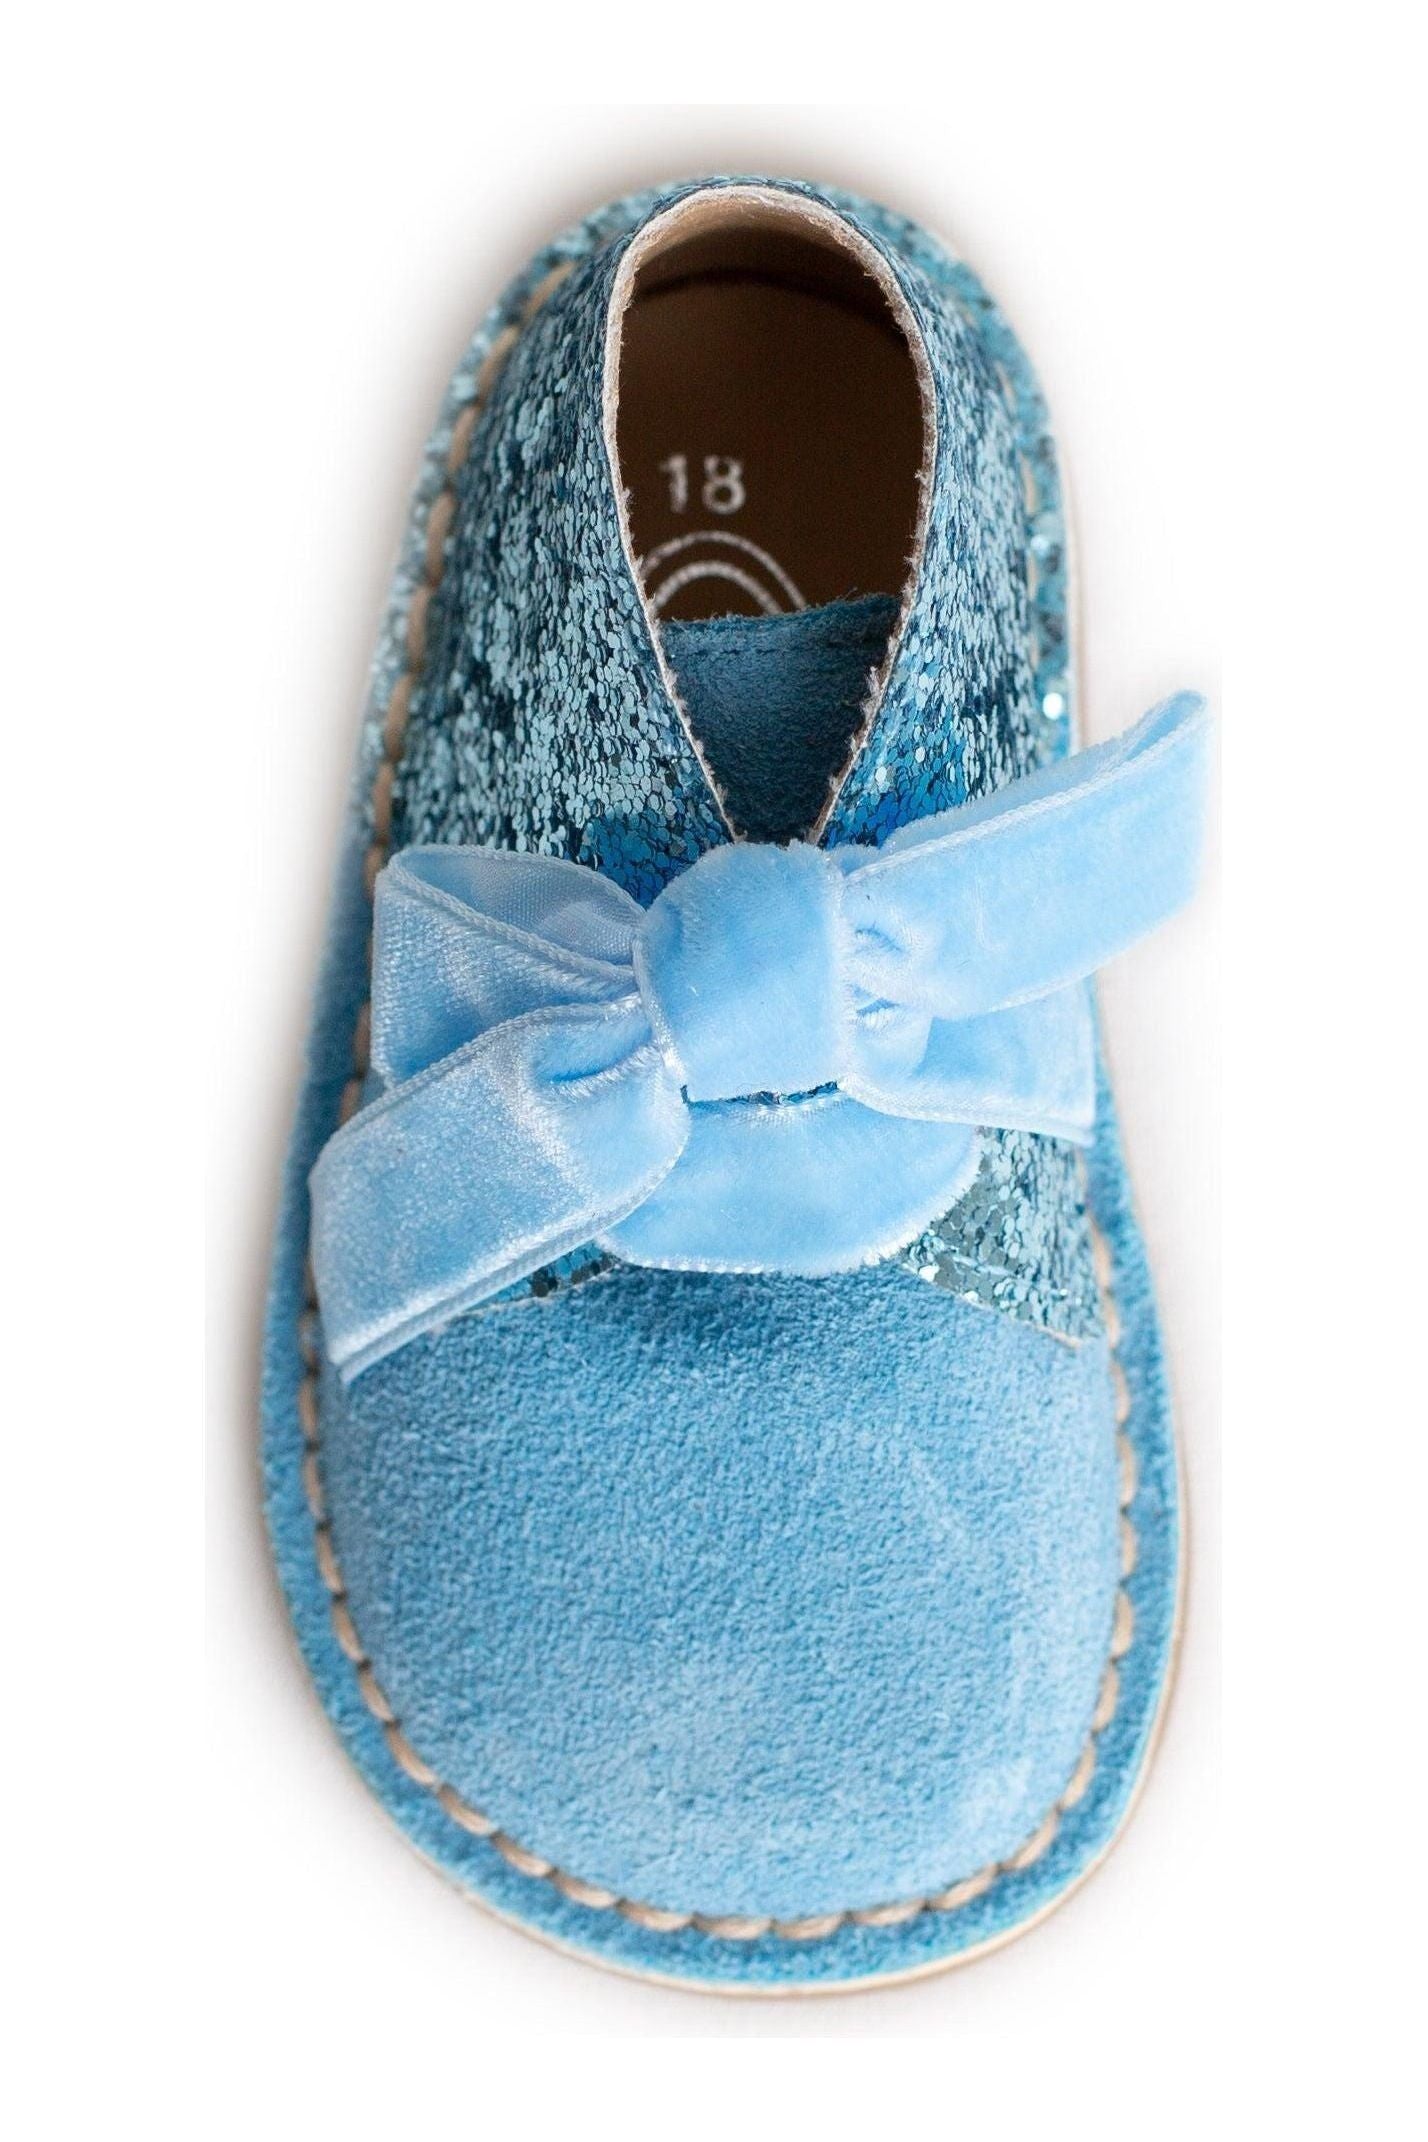 Rochy Blue Glitter Boots NON RETURNABLE Dainty Delilah 